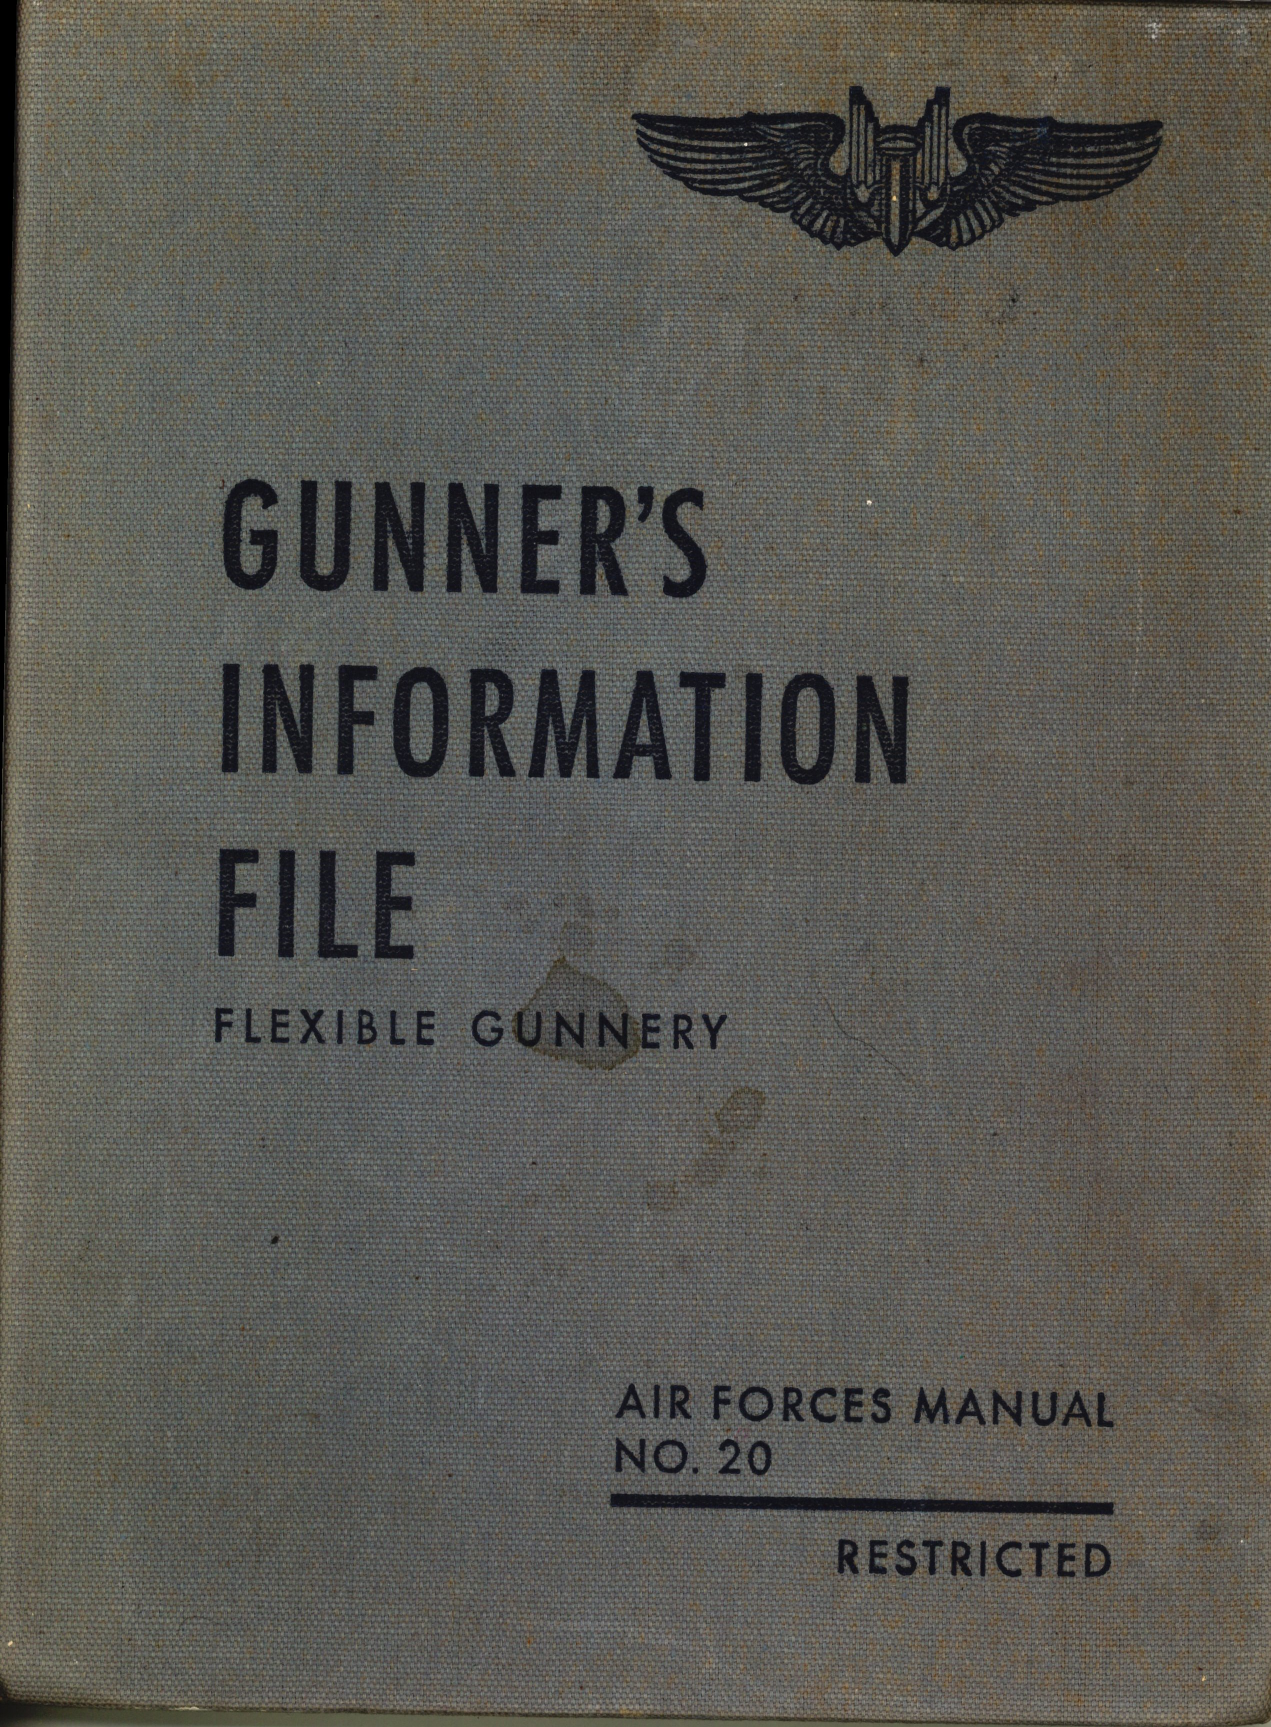 Sample page 1 from AirCorps Library document: Gunner's Information File - Flexible Gunnery